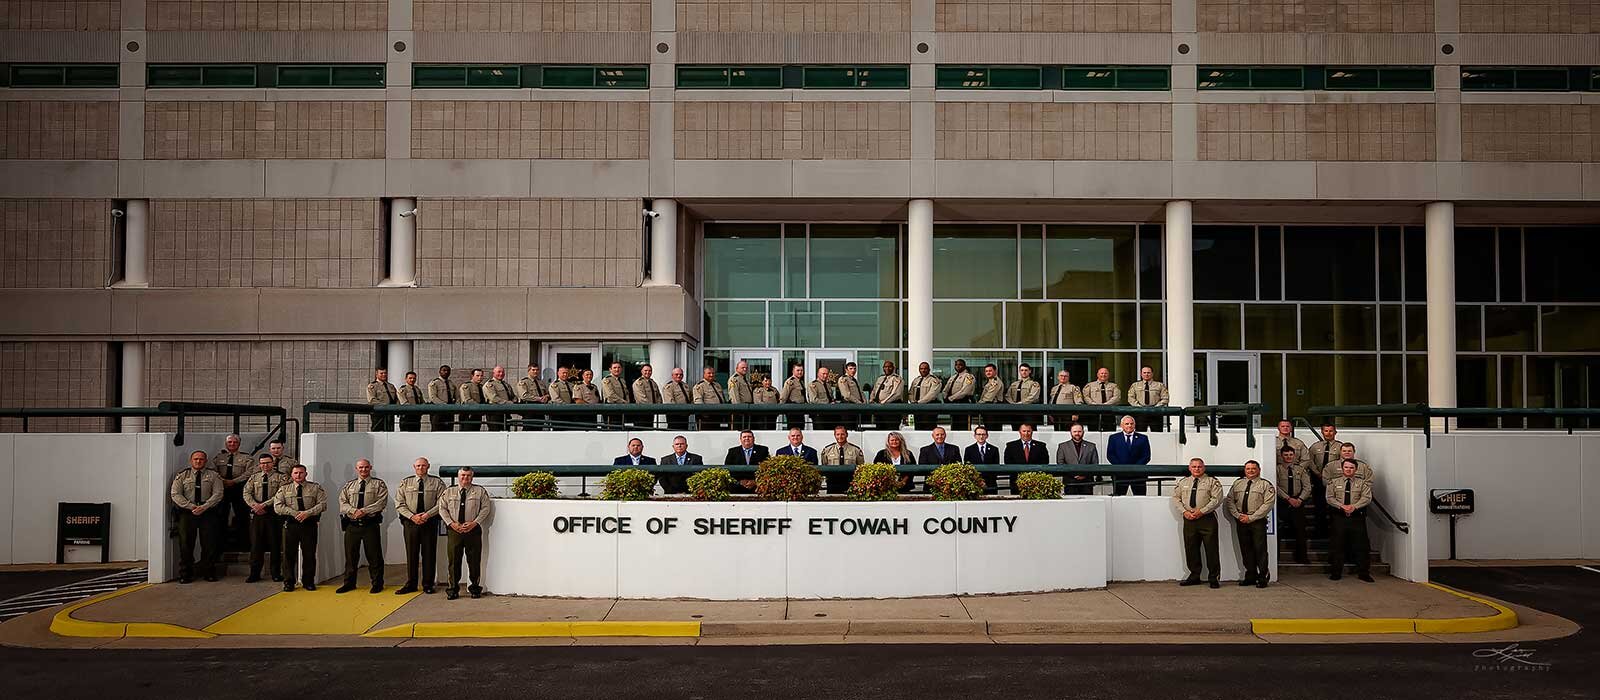 Sheriff and Deputies standing in front of Sheriff's Office building